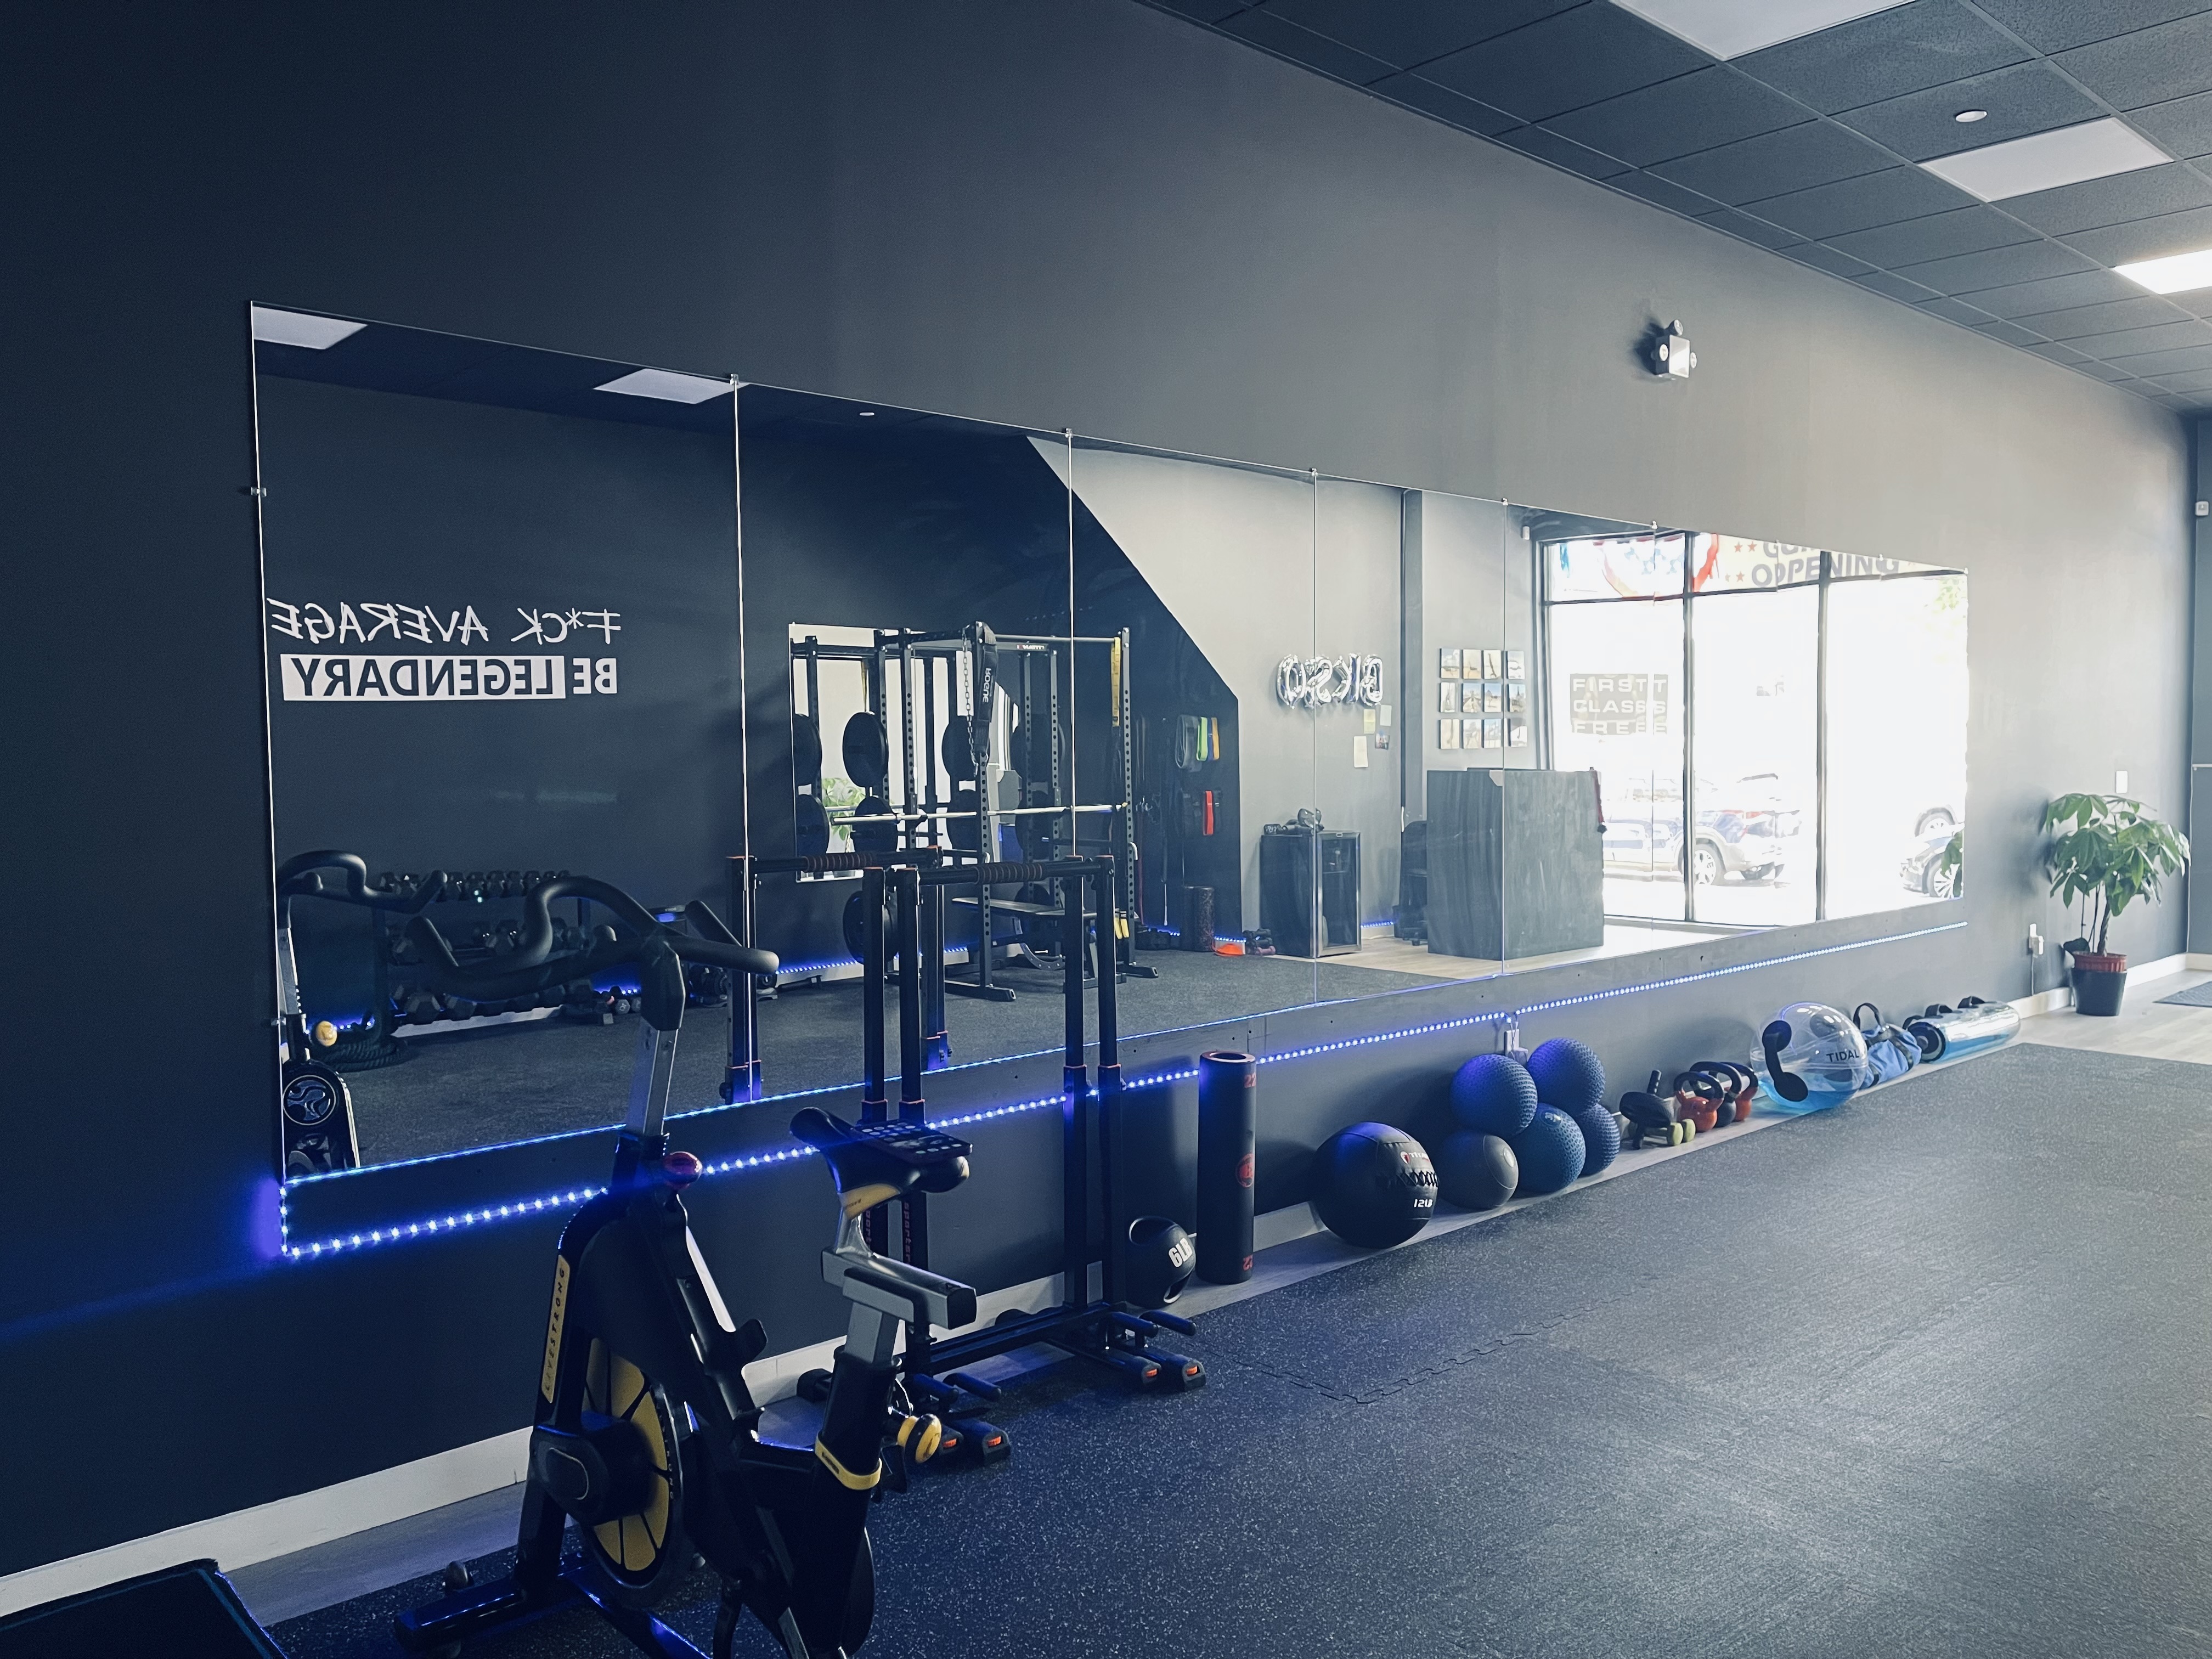 Introducing bande, The Boutique Fitness Platform Transforming The In-Studio  Experience